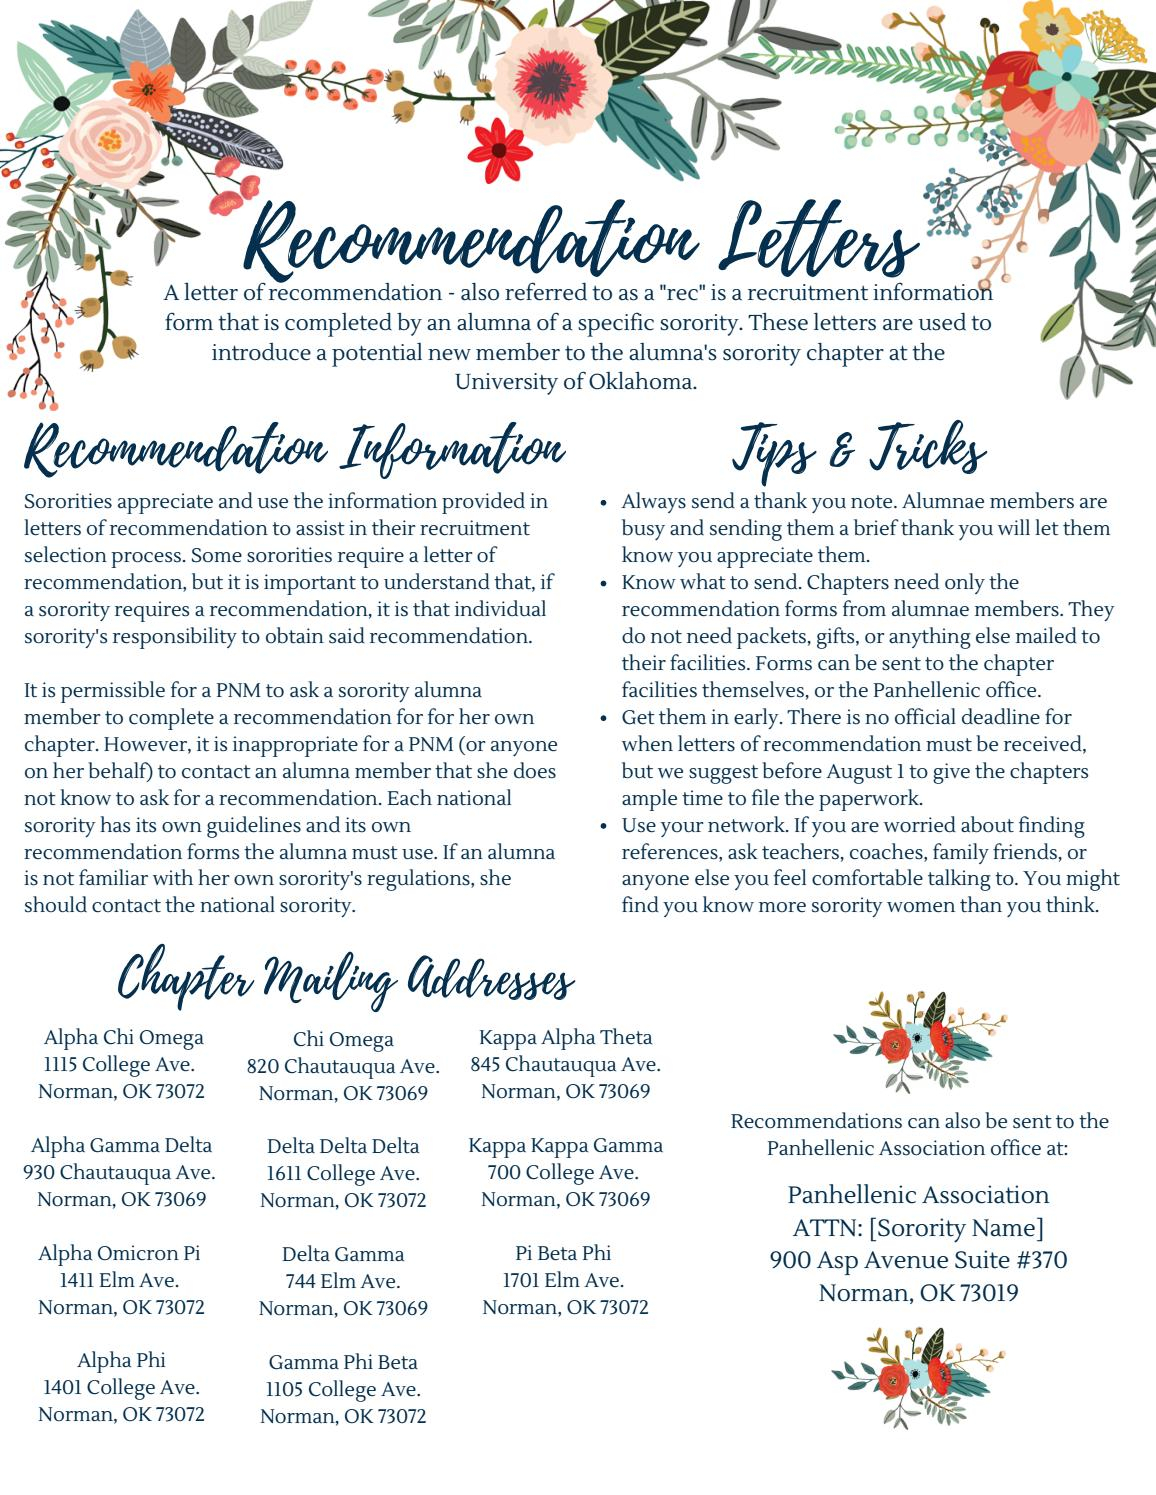 Tri Delta Letter Of Recommendation Debandje throughout proportions 1156 X 1495